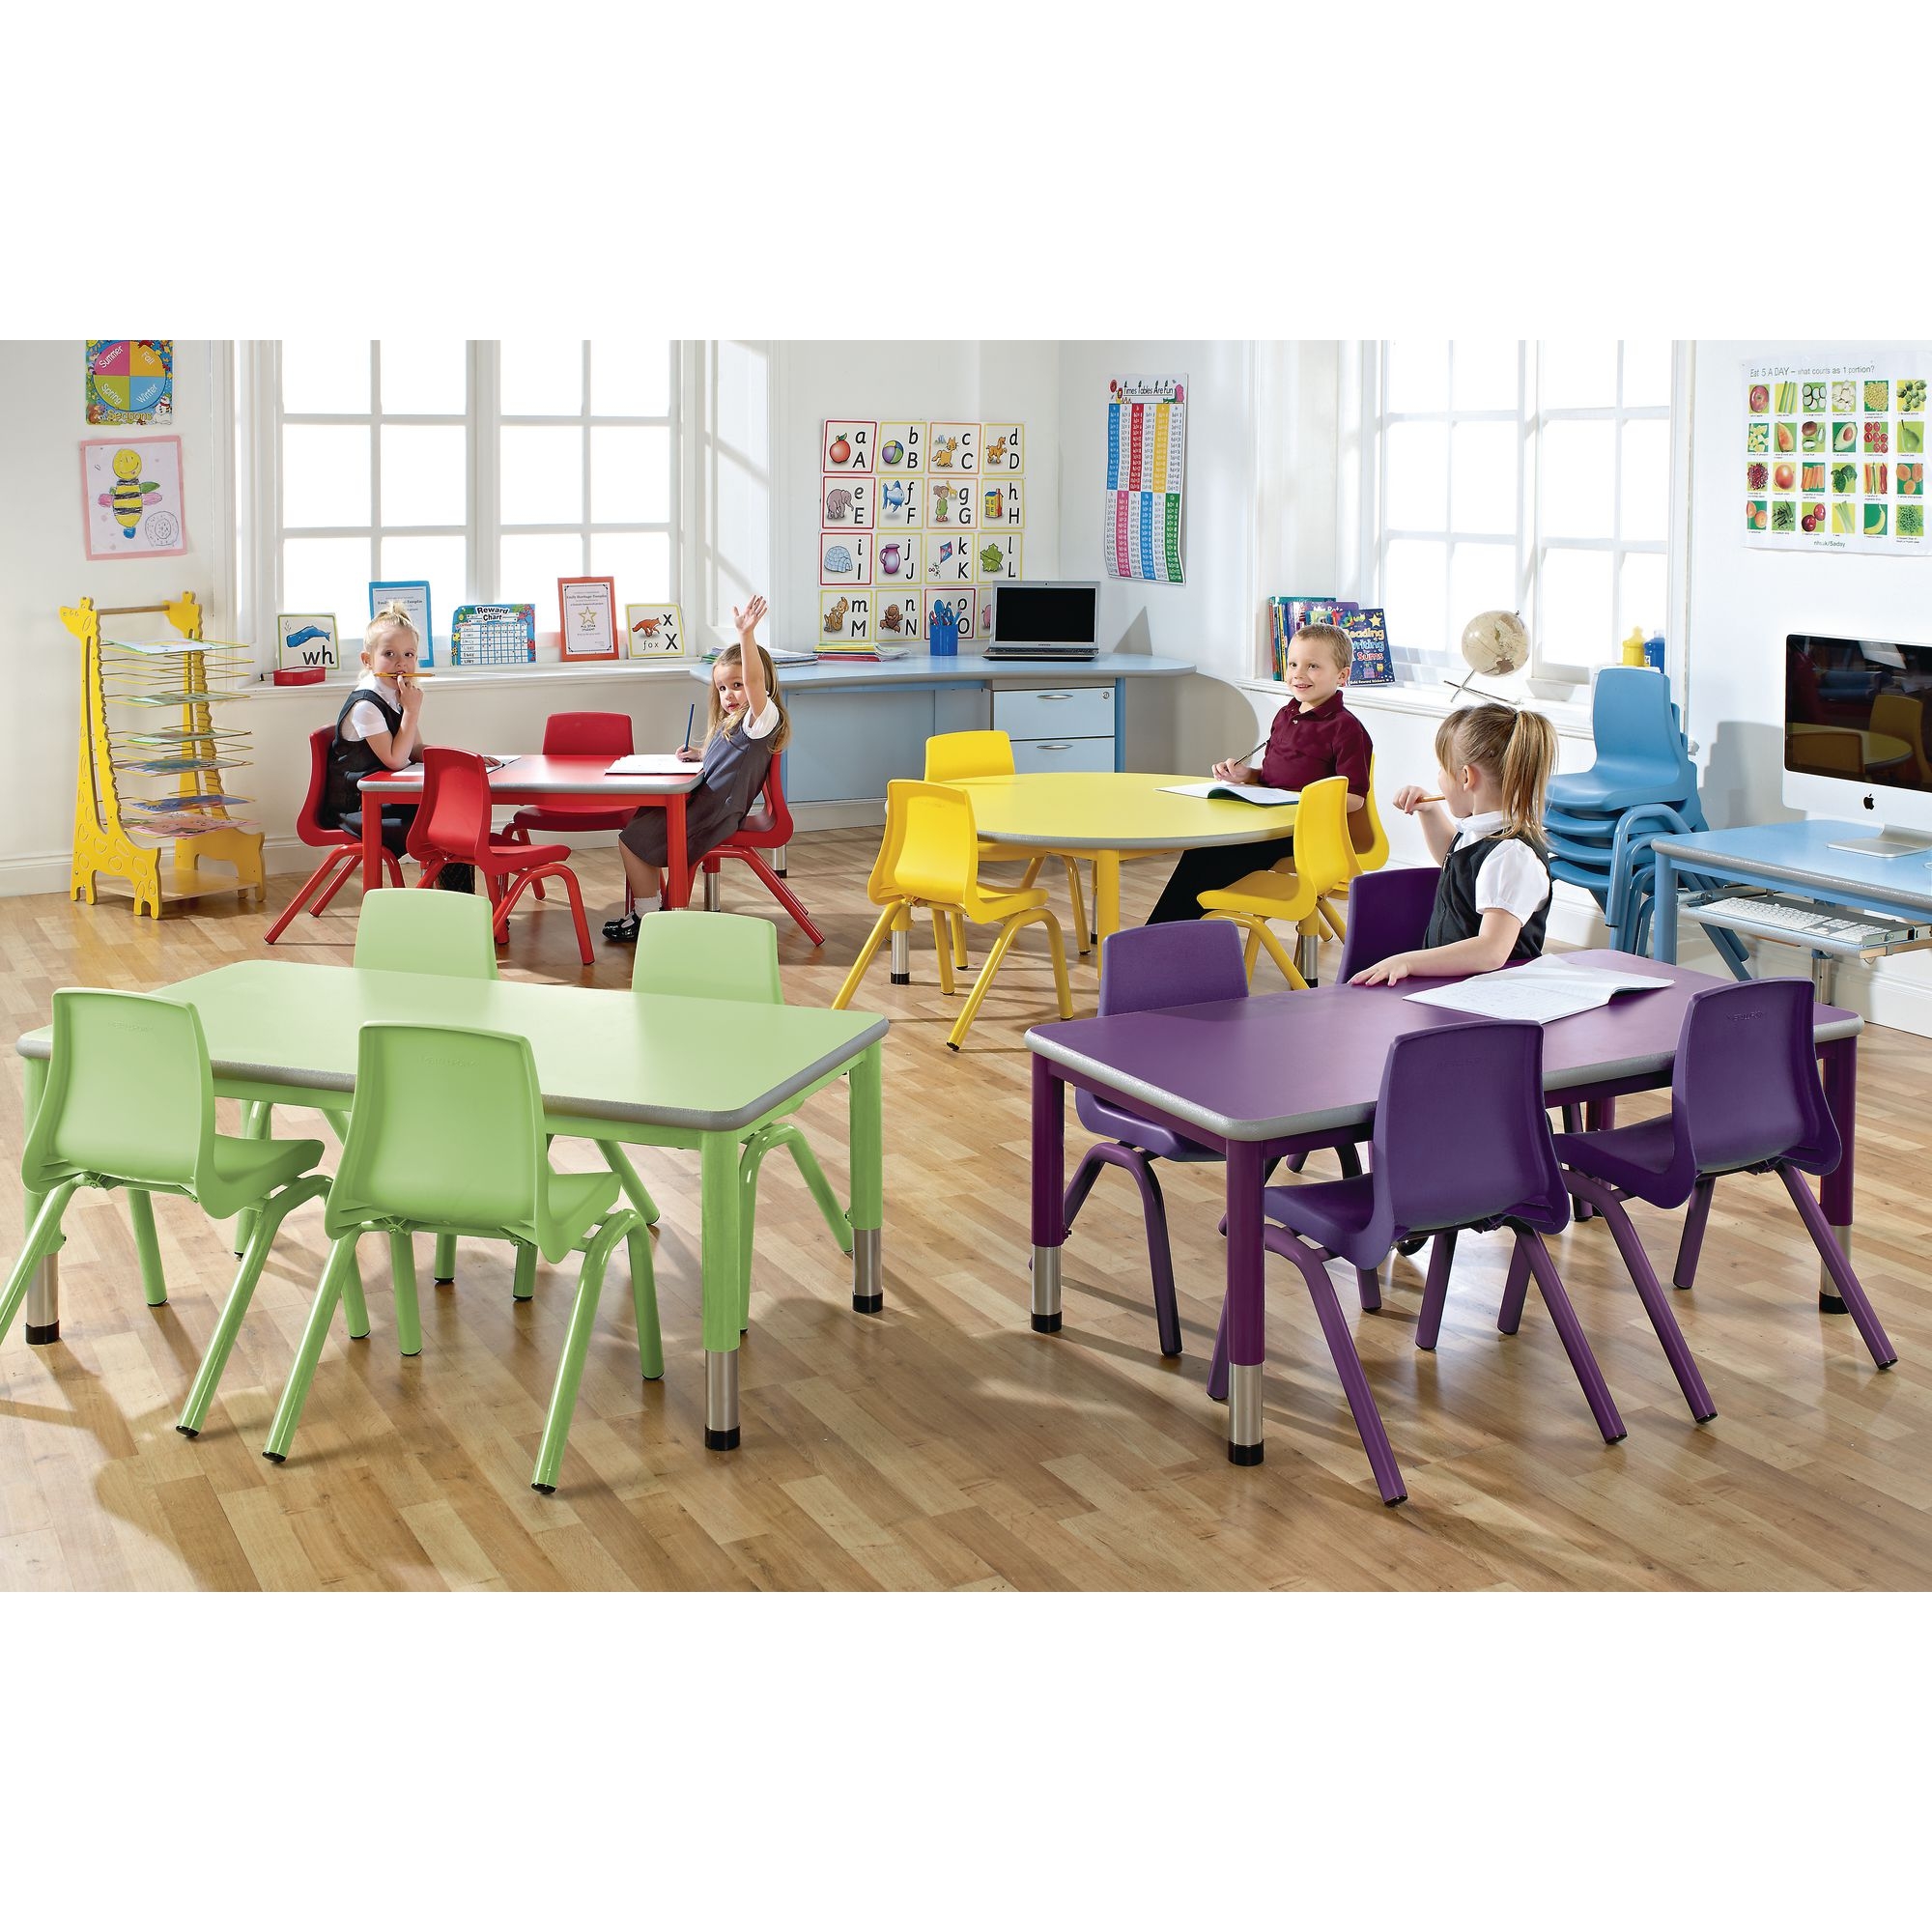 Harlequin Rectangular Height Adjustable Steel Classroom Pack: Table and 4 Chairs - 900 x 600 x 530mm - Red